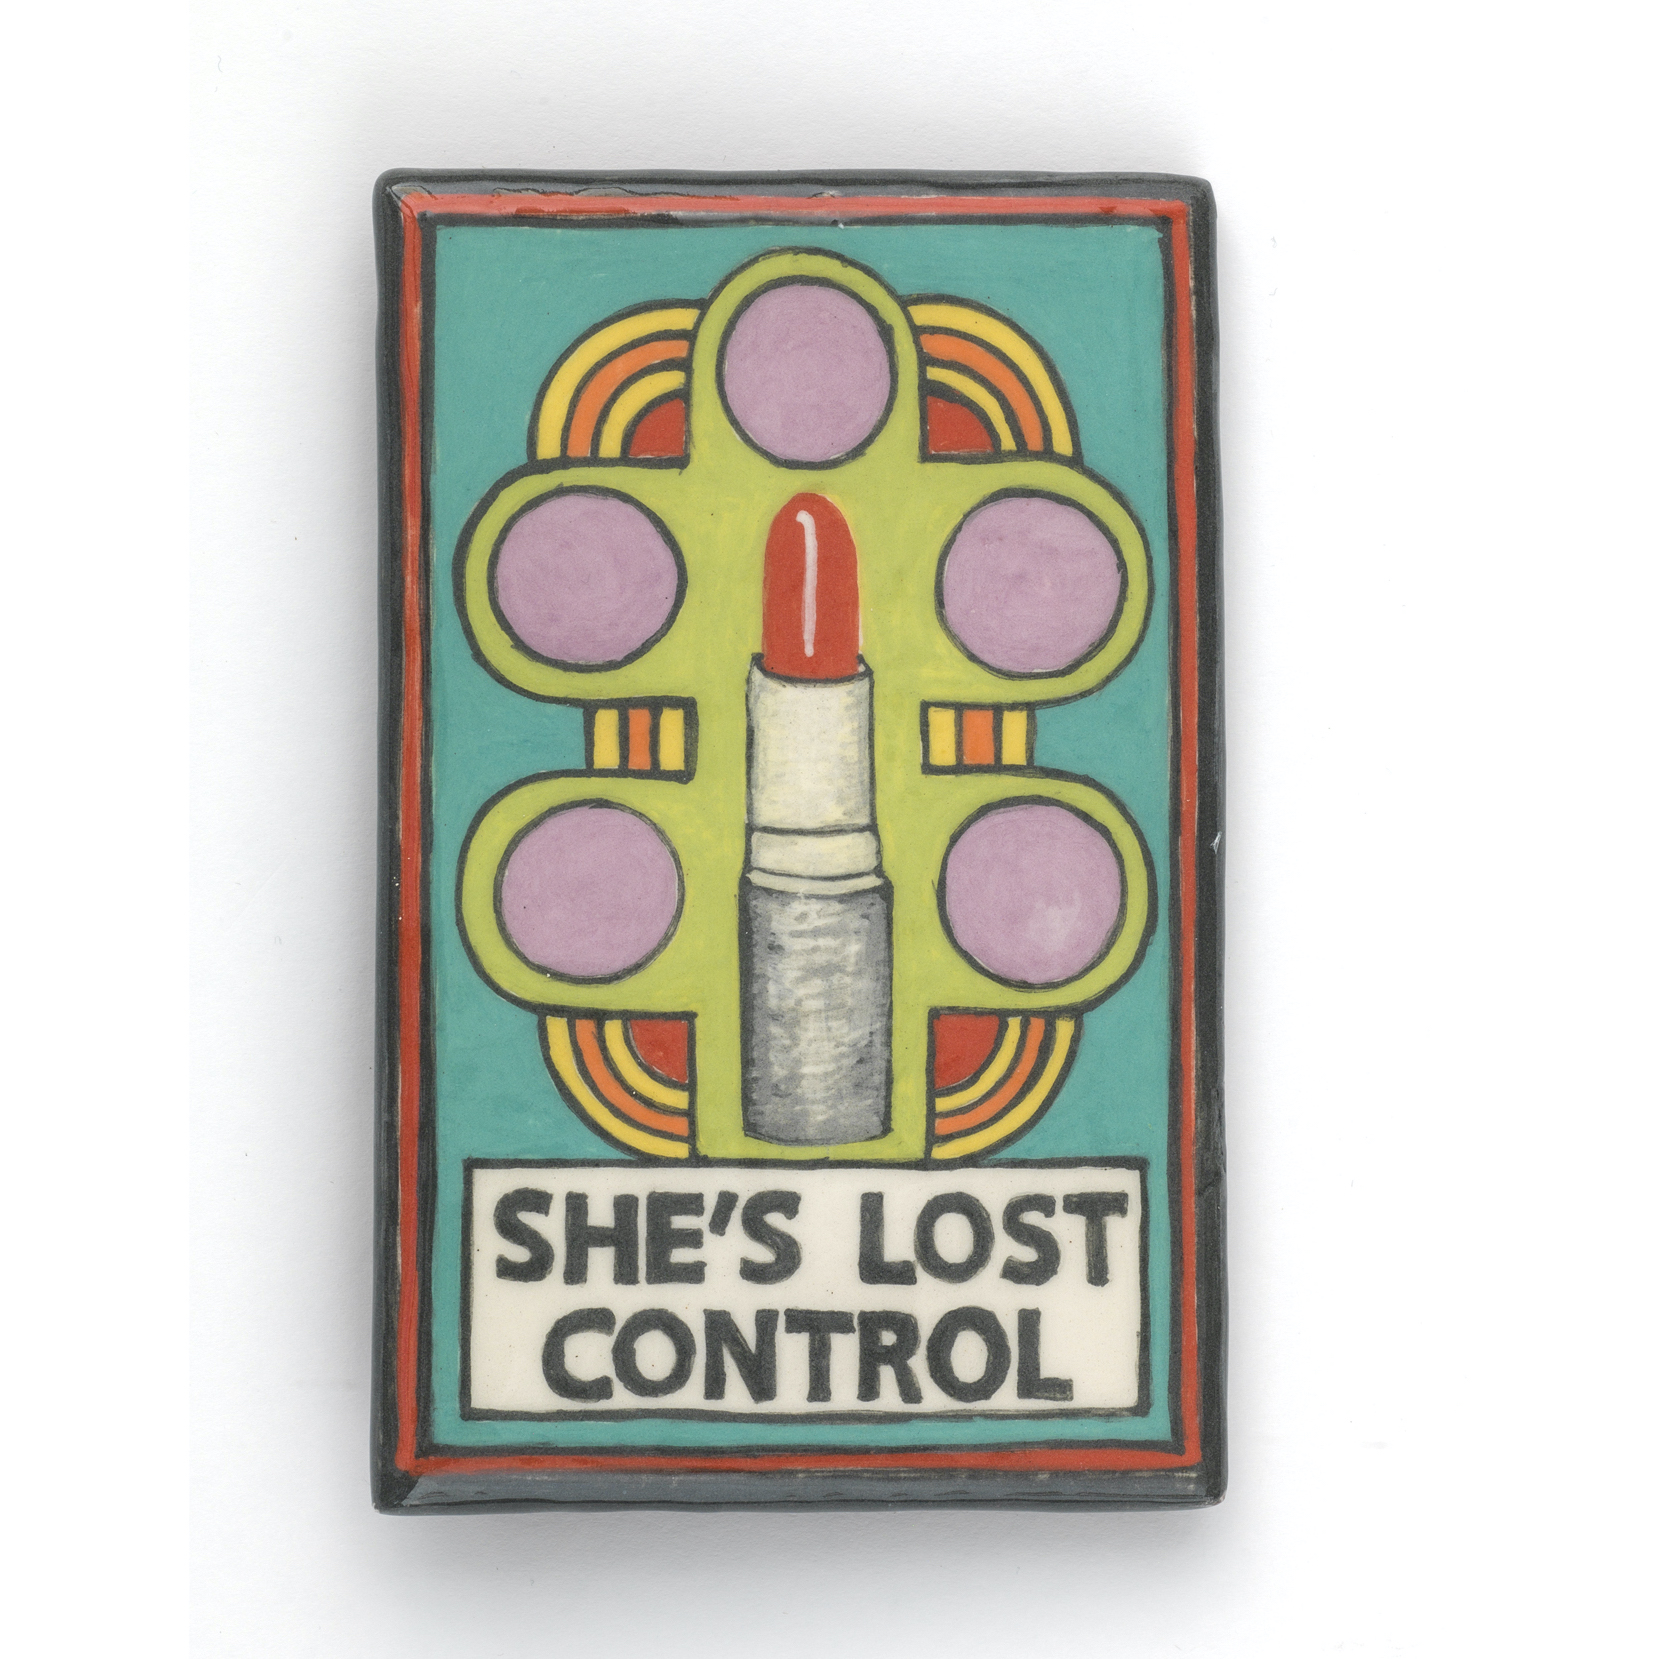 Shes Lost Control 2022 Messums London